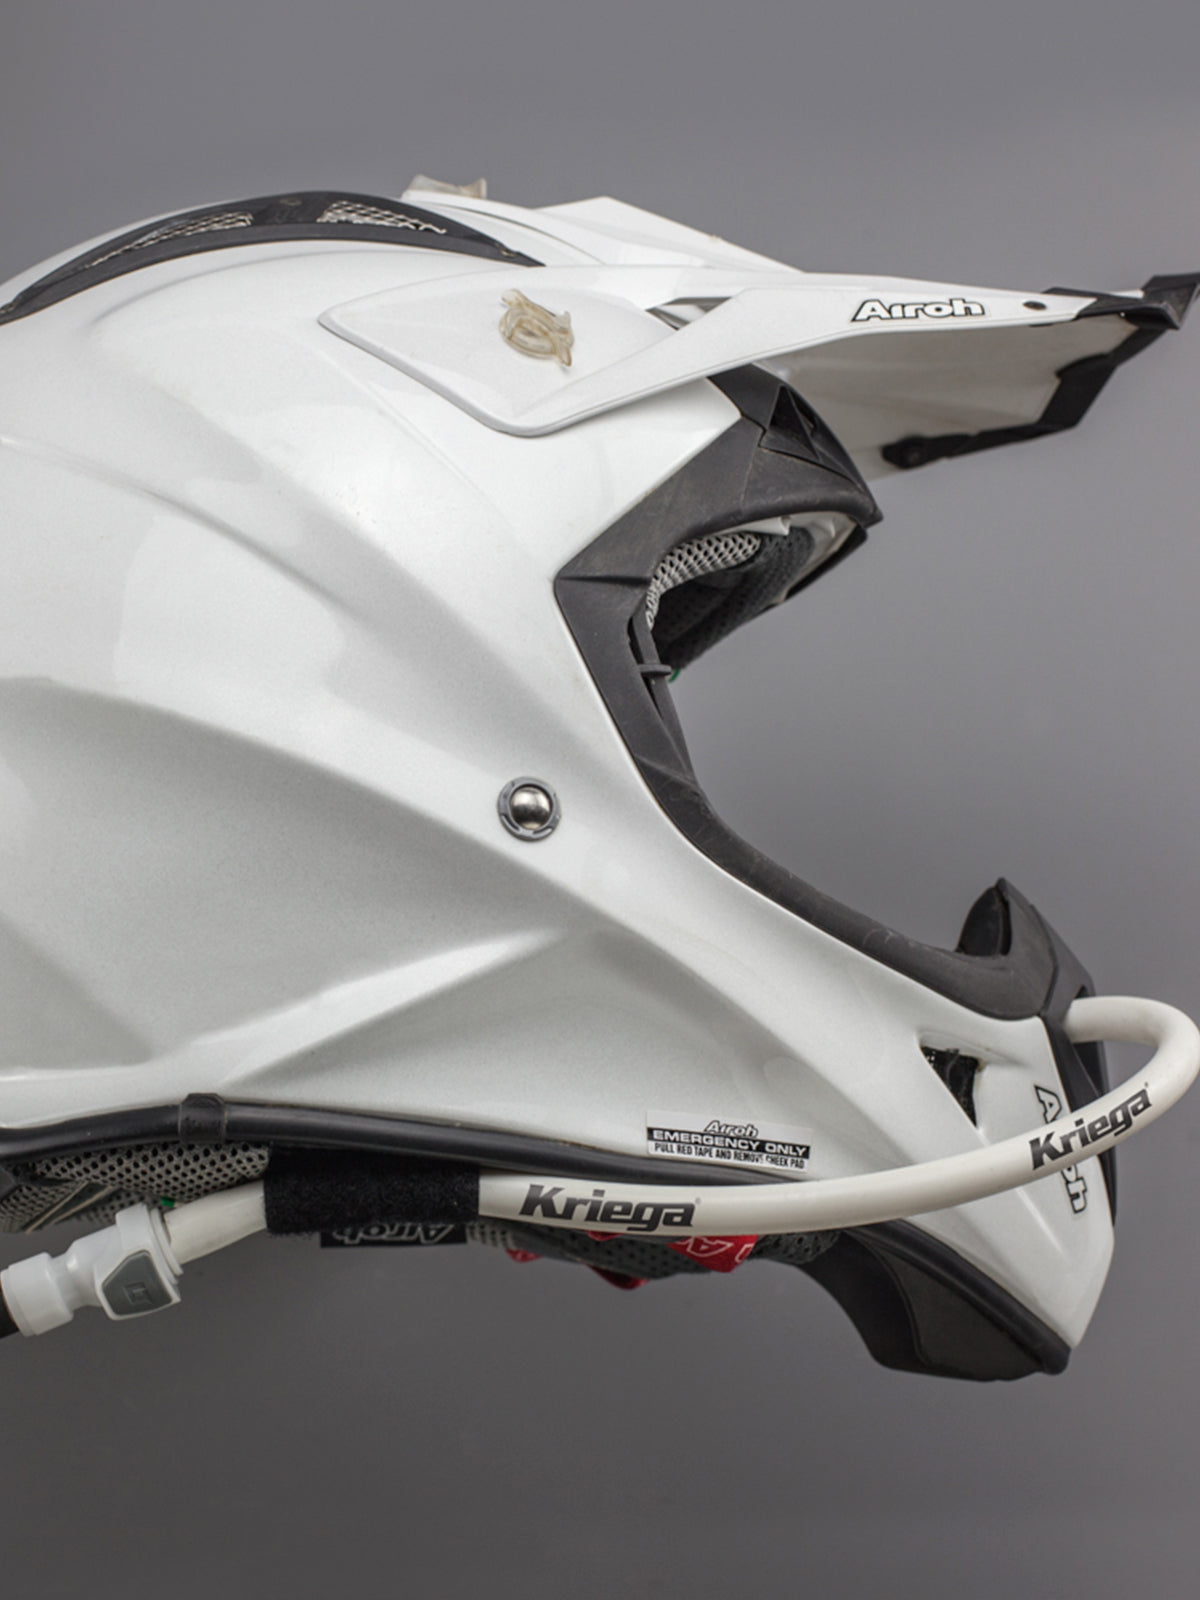 Kriega Hands-free Kit attached to side of helmet